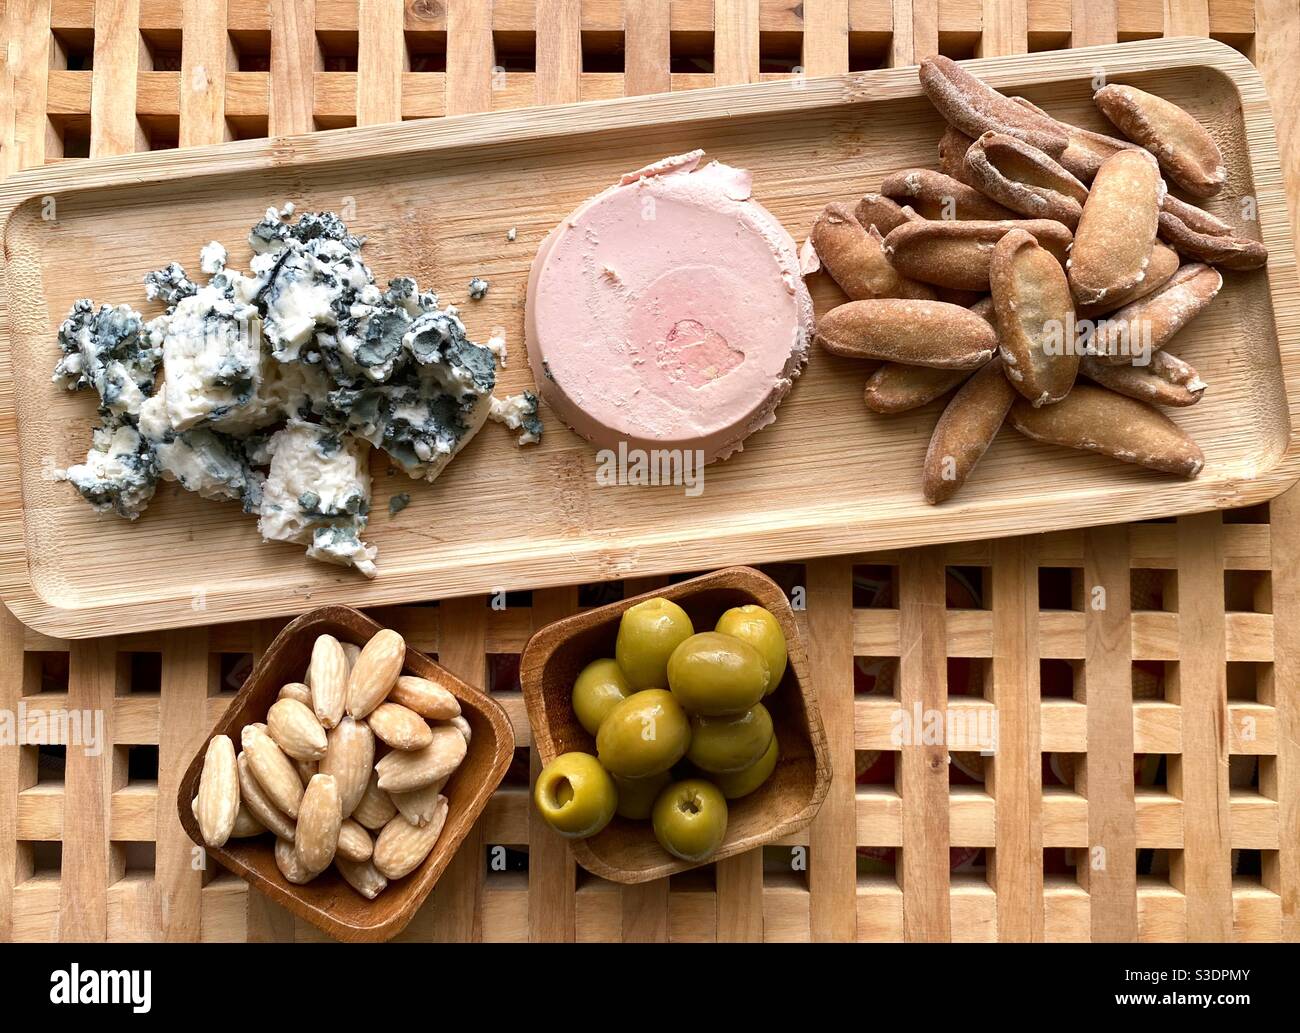 Appetiser with blue cheese, foie, picos, almonds and olives on a wooden background Stock Photo